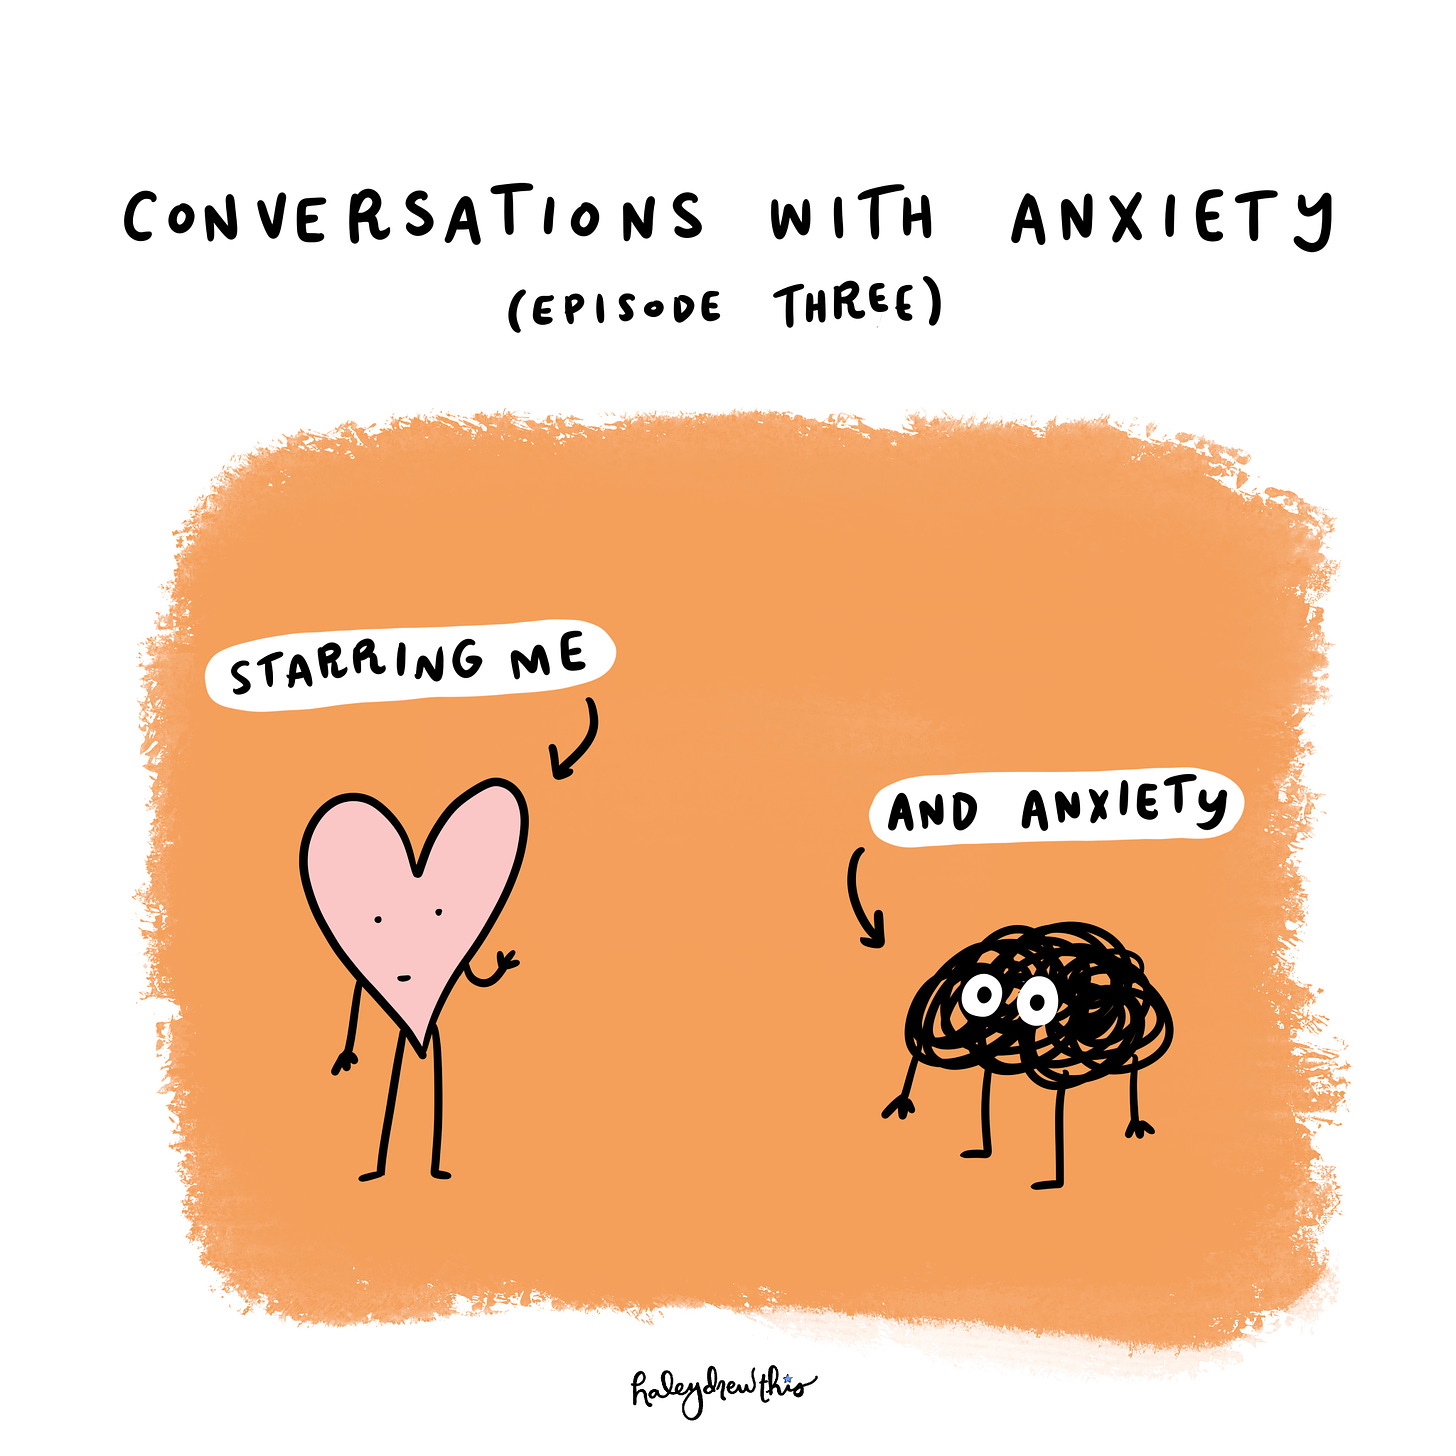 Conversations with anxiety: episode three